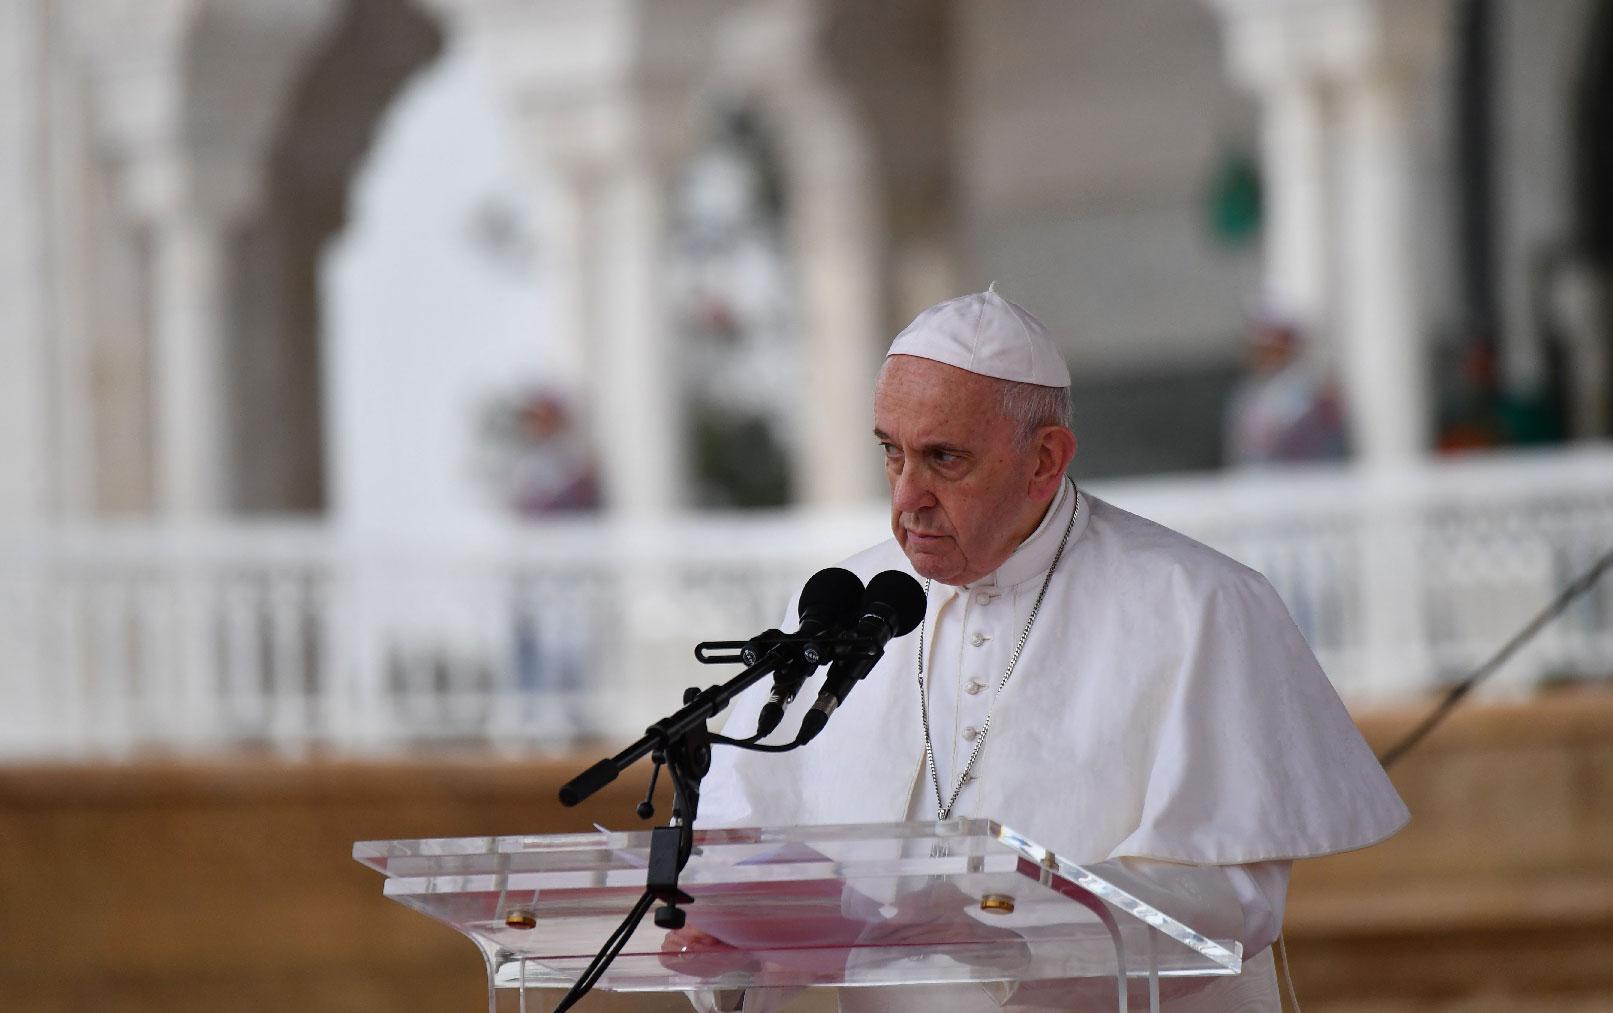 Pope Francis delivers a speech in the Moroccan capital Rabat on March 30, 2019 during the pontiff's visit which will see him meet Muslim leaders and migrants ahead of a mass with the minority Catholic community.